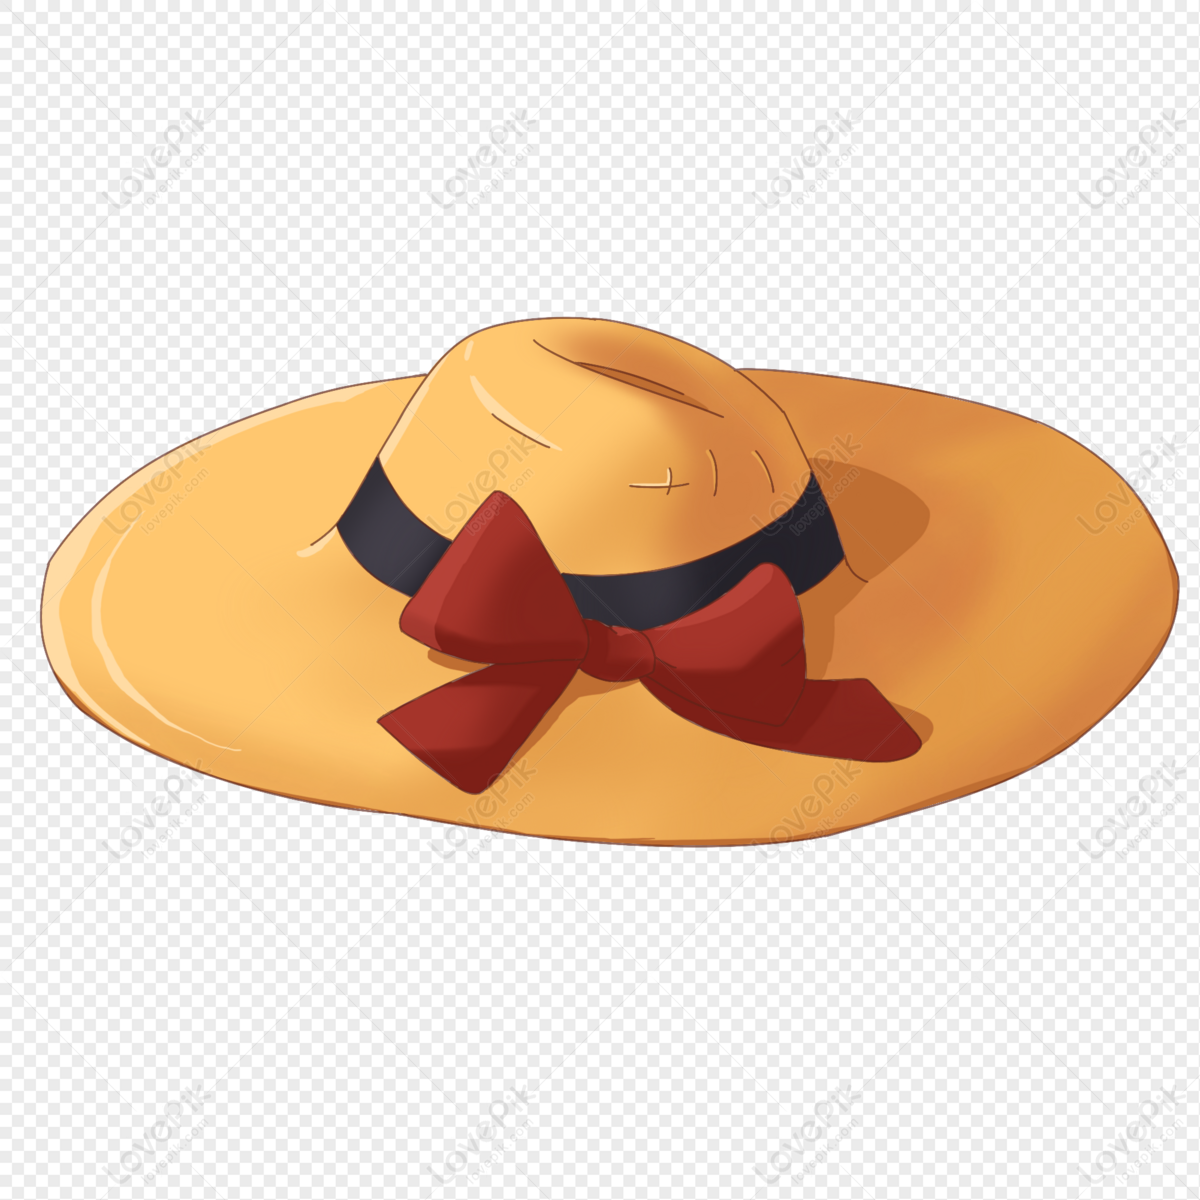 Sunhat PNG Image And Clipart Image For Free Download - Lovepik | 401184438